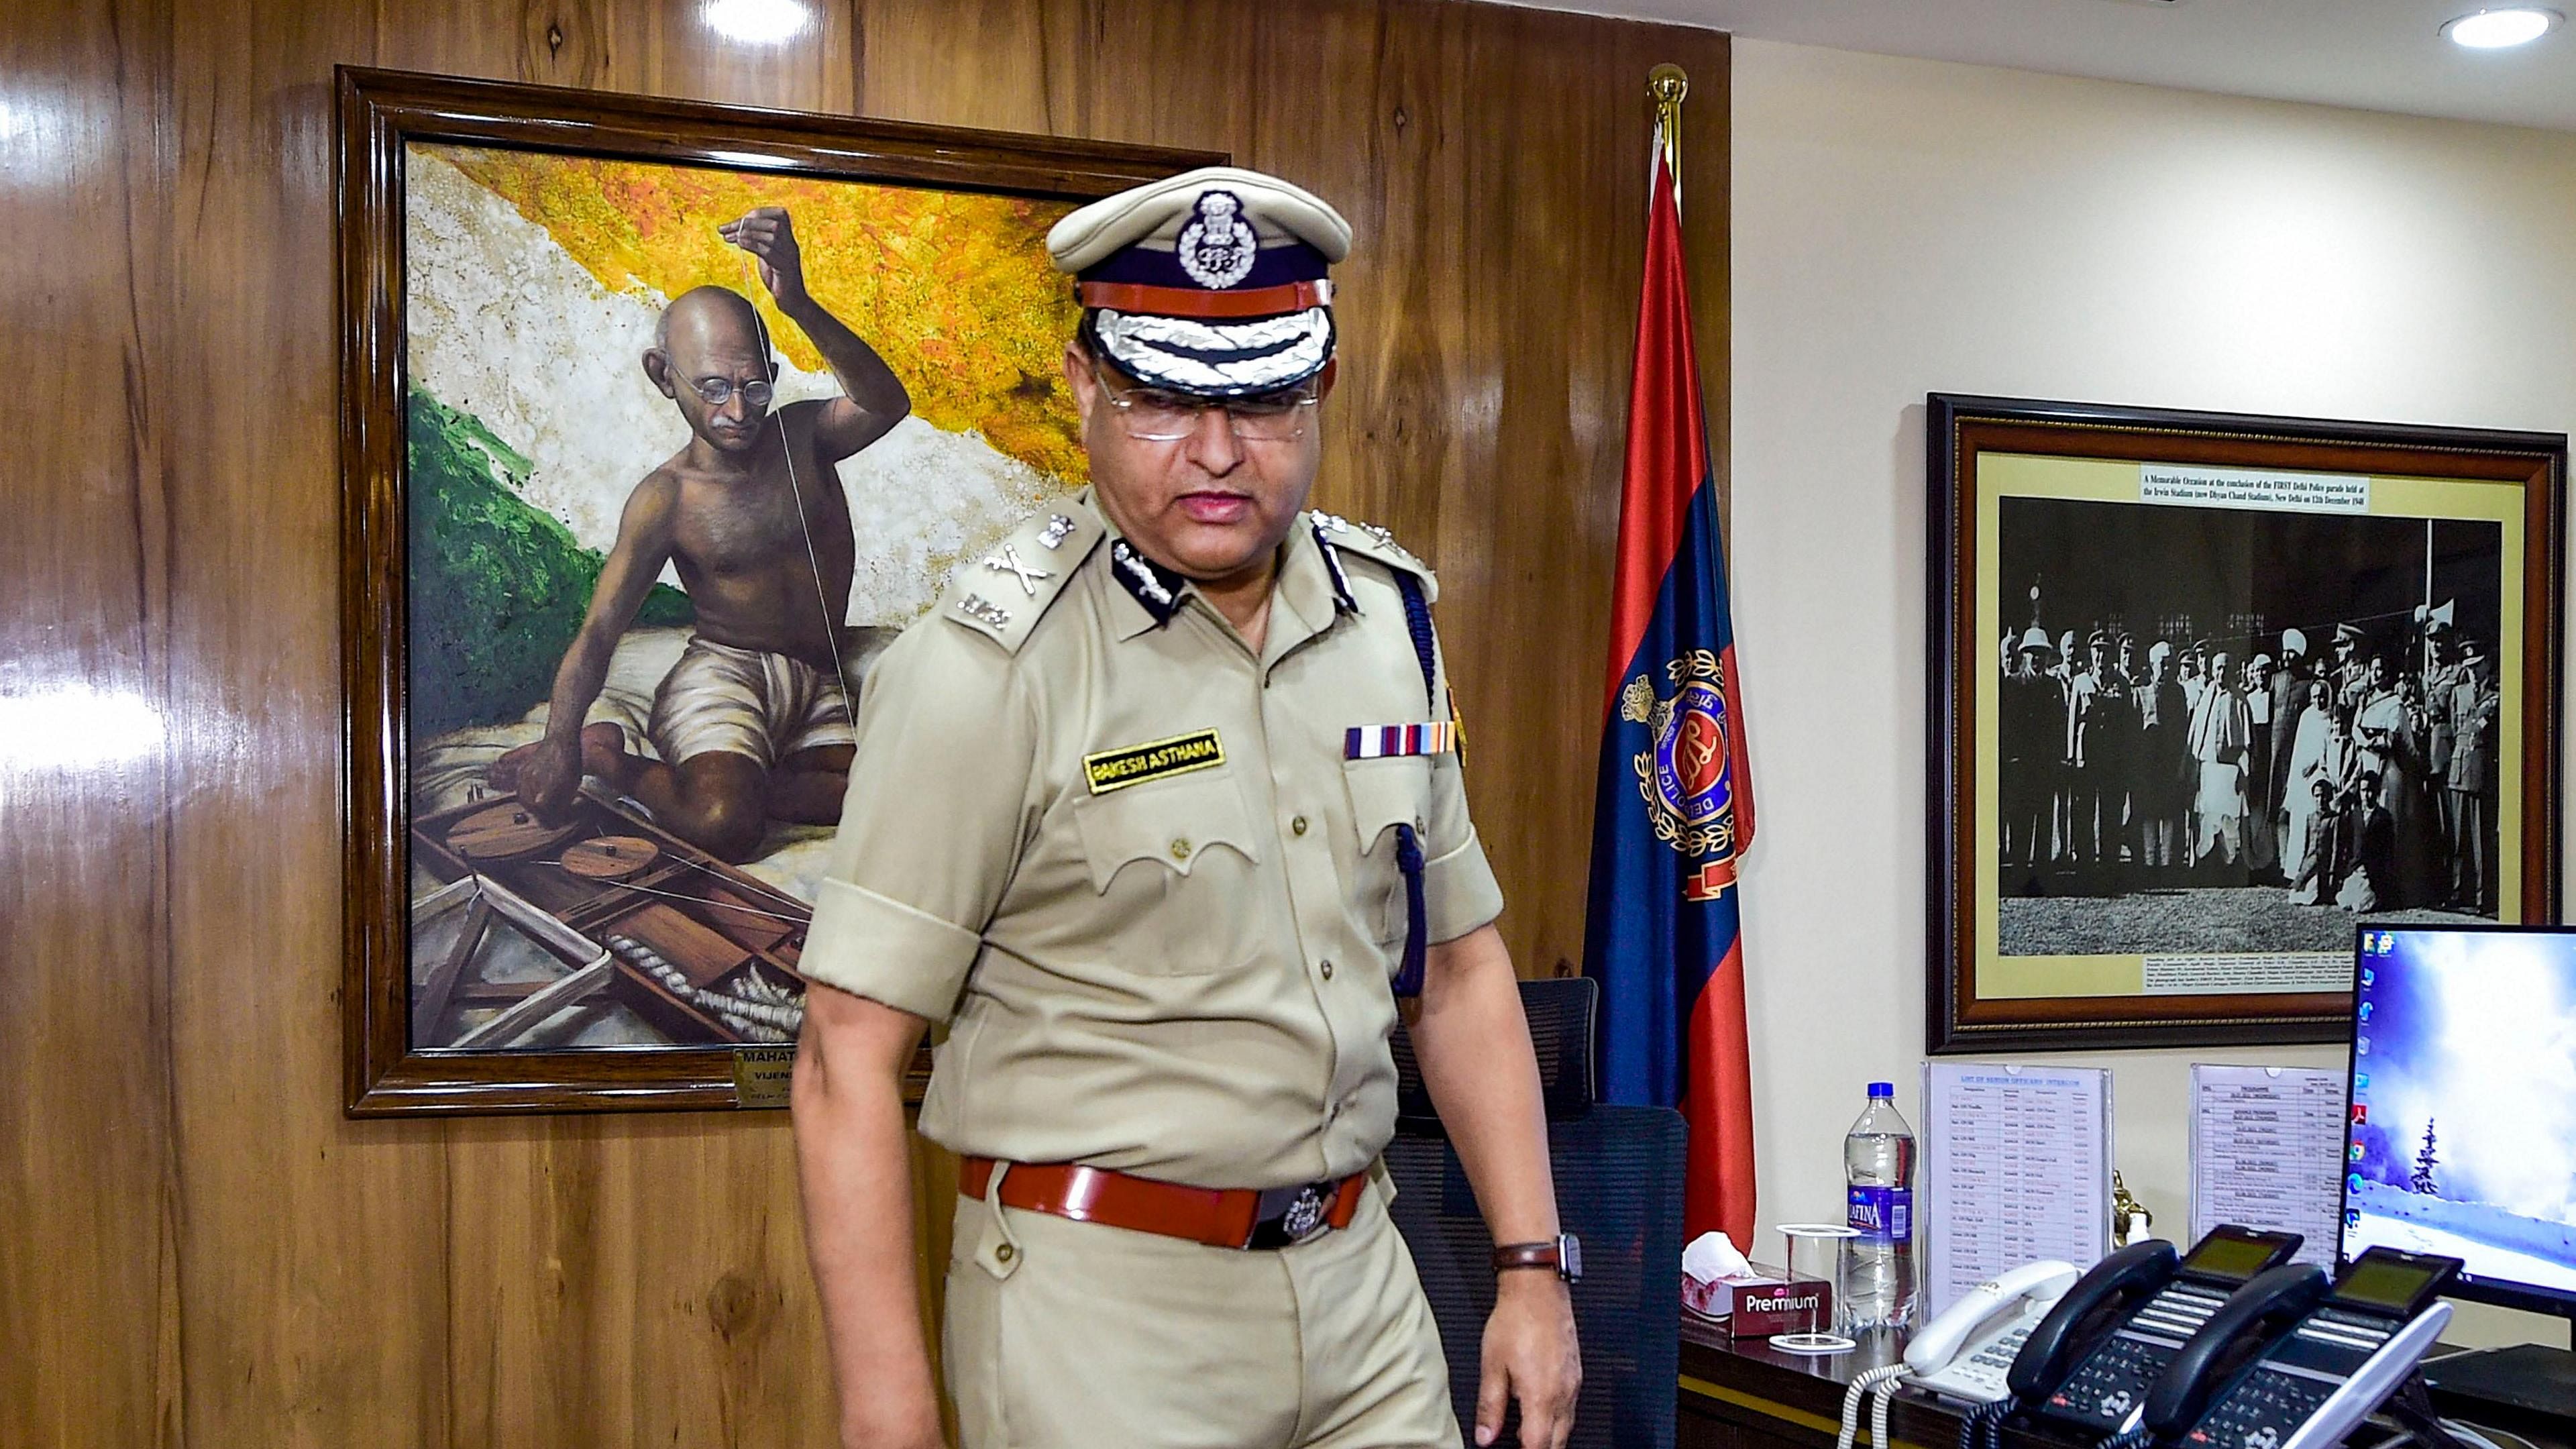 The resolution, which expressed disapproval against the appointment of "controversial Gujarat cadre officer being forced upon Delhi as Police Commissioner'', also demanded that the Ministry of Home Affairs (MHA) reverse the decision. Credit: PTI Photo